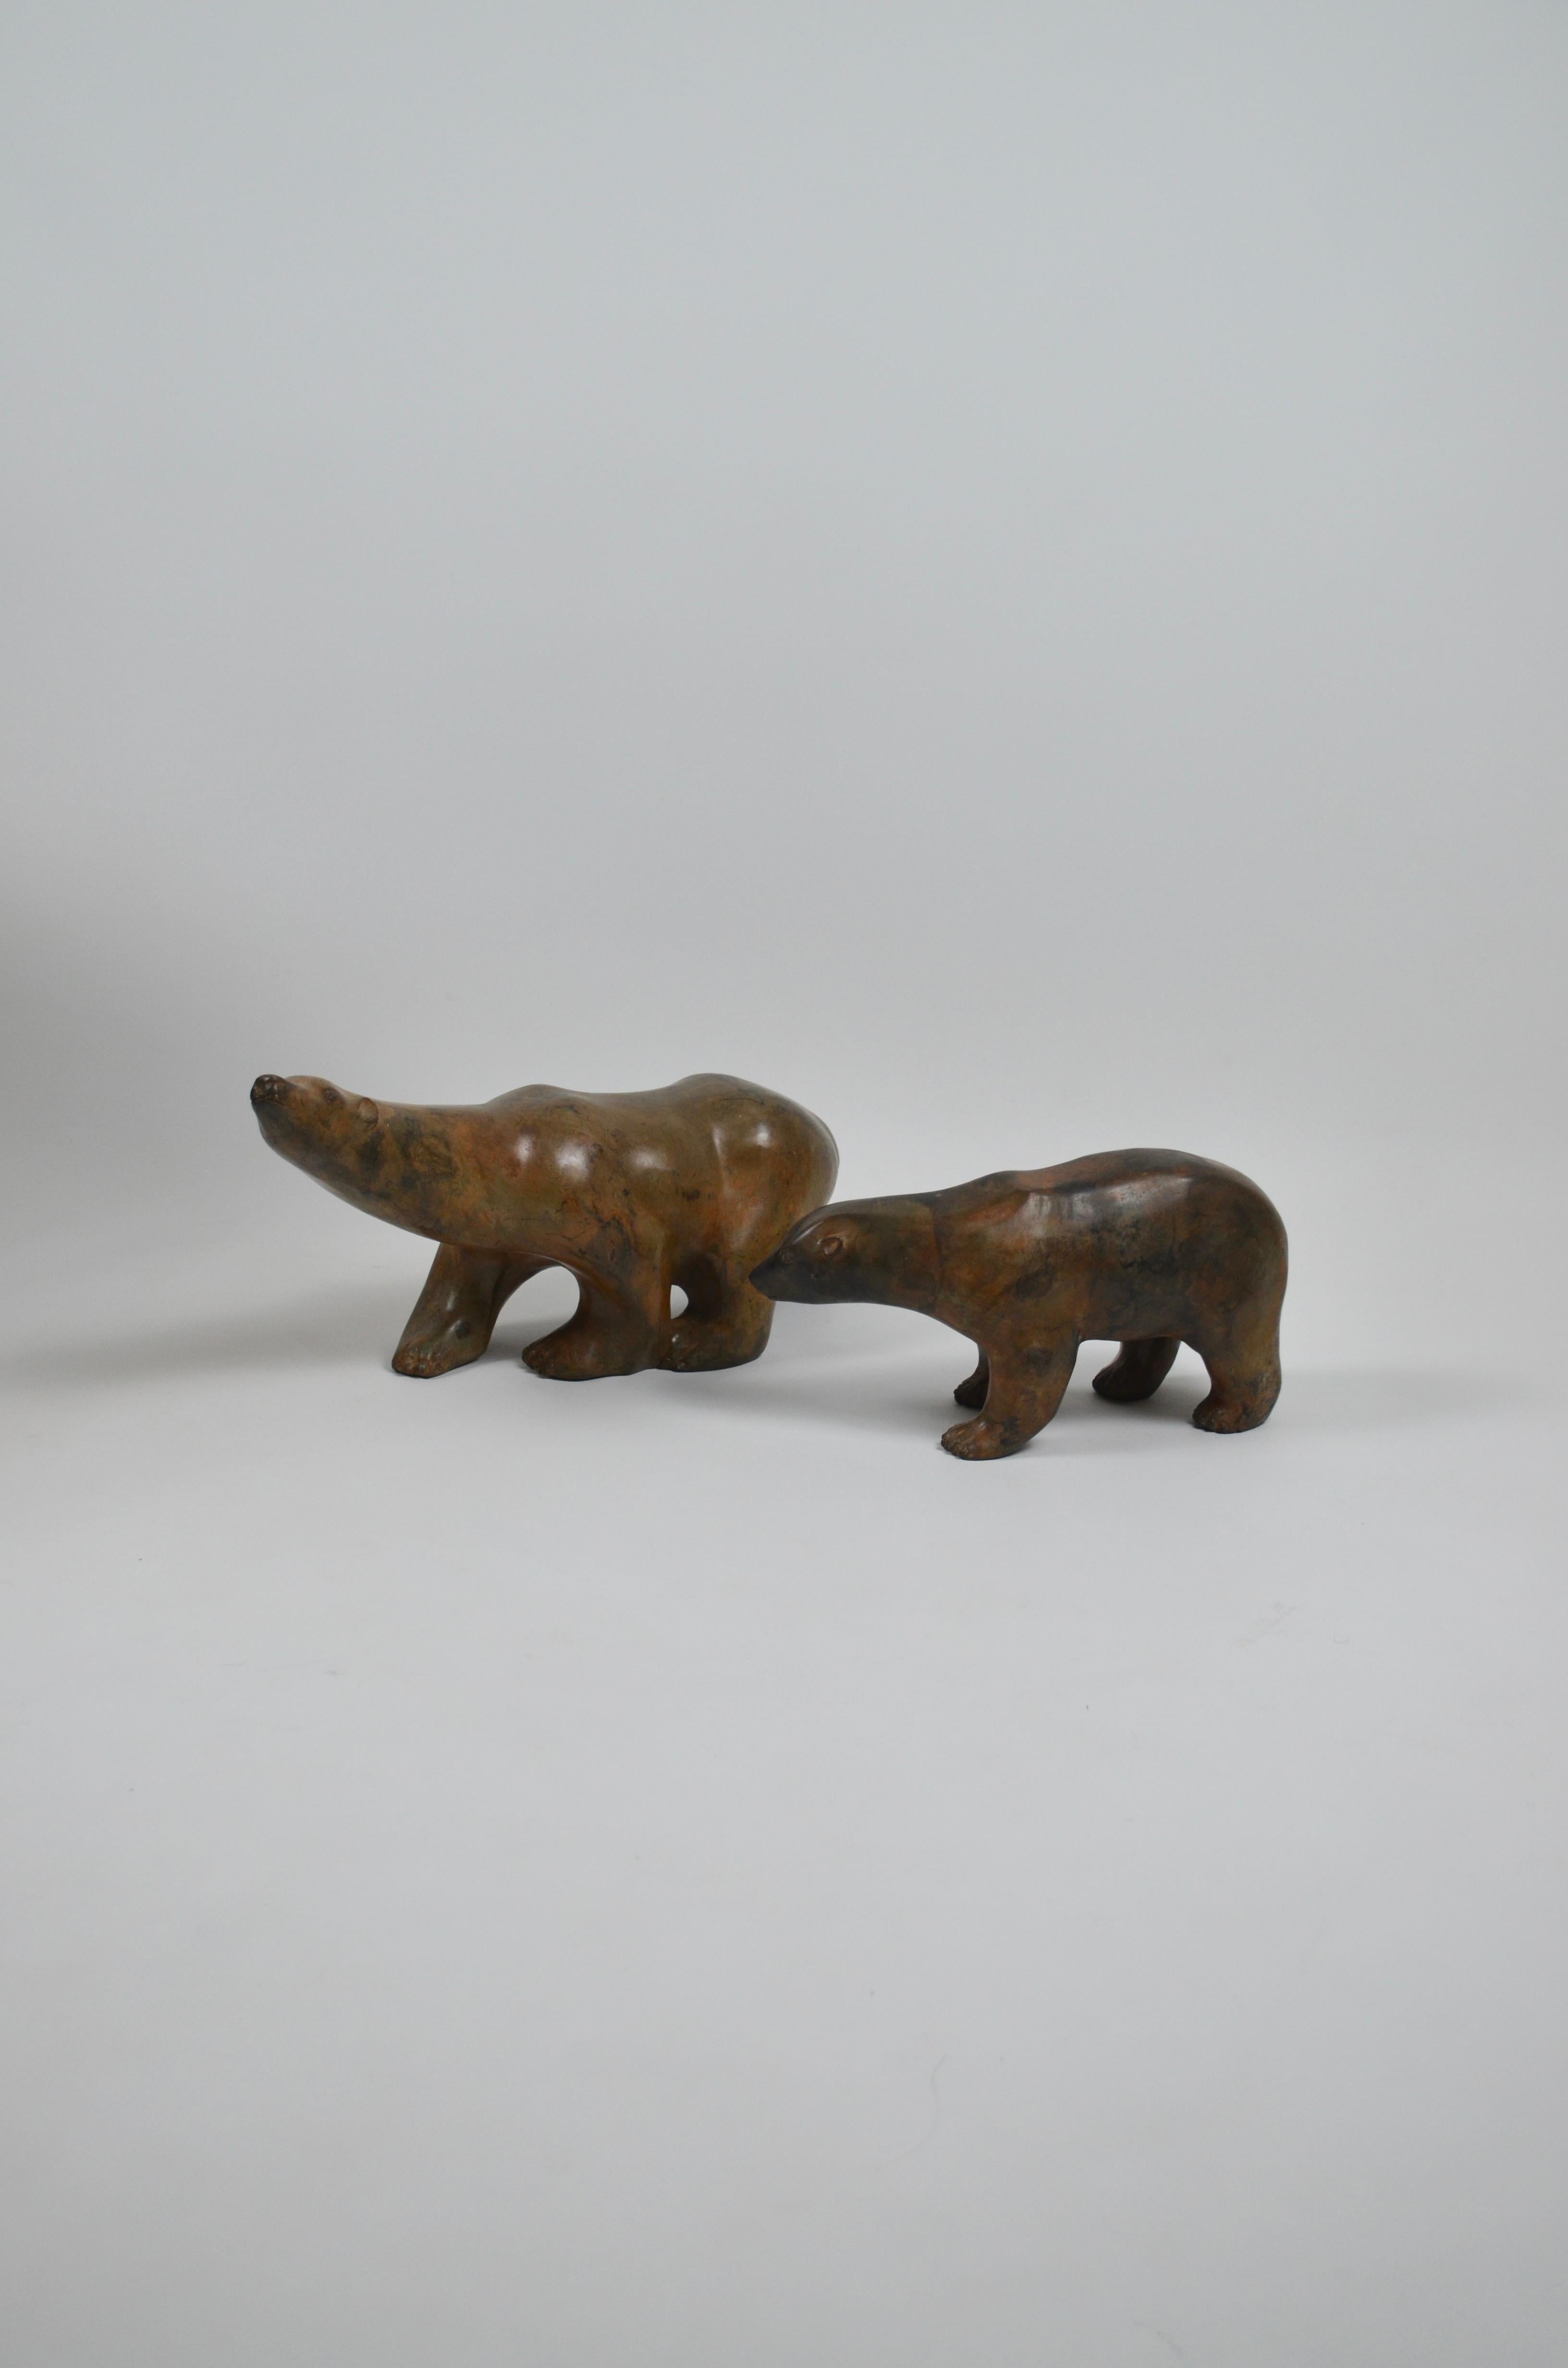 Pair of 2 bronze polar bears by the French sculptor Pierre Chenet.
Beautiful patina and very elegant
Each bear features the artist's stamp underneath
The big bear: W 48cm H 22cm D 15cm
The little bear: W 32cm H 17cm D 10cm